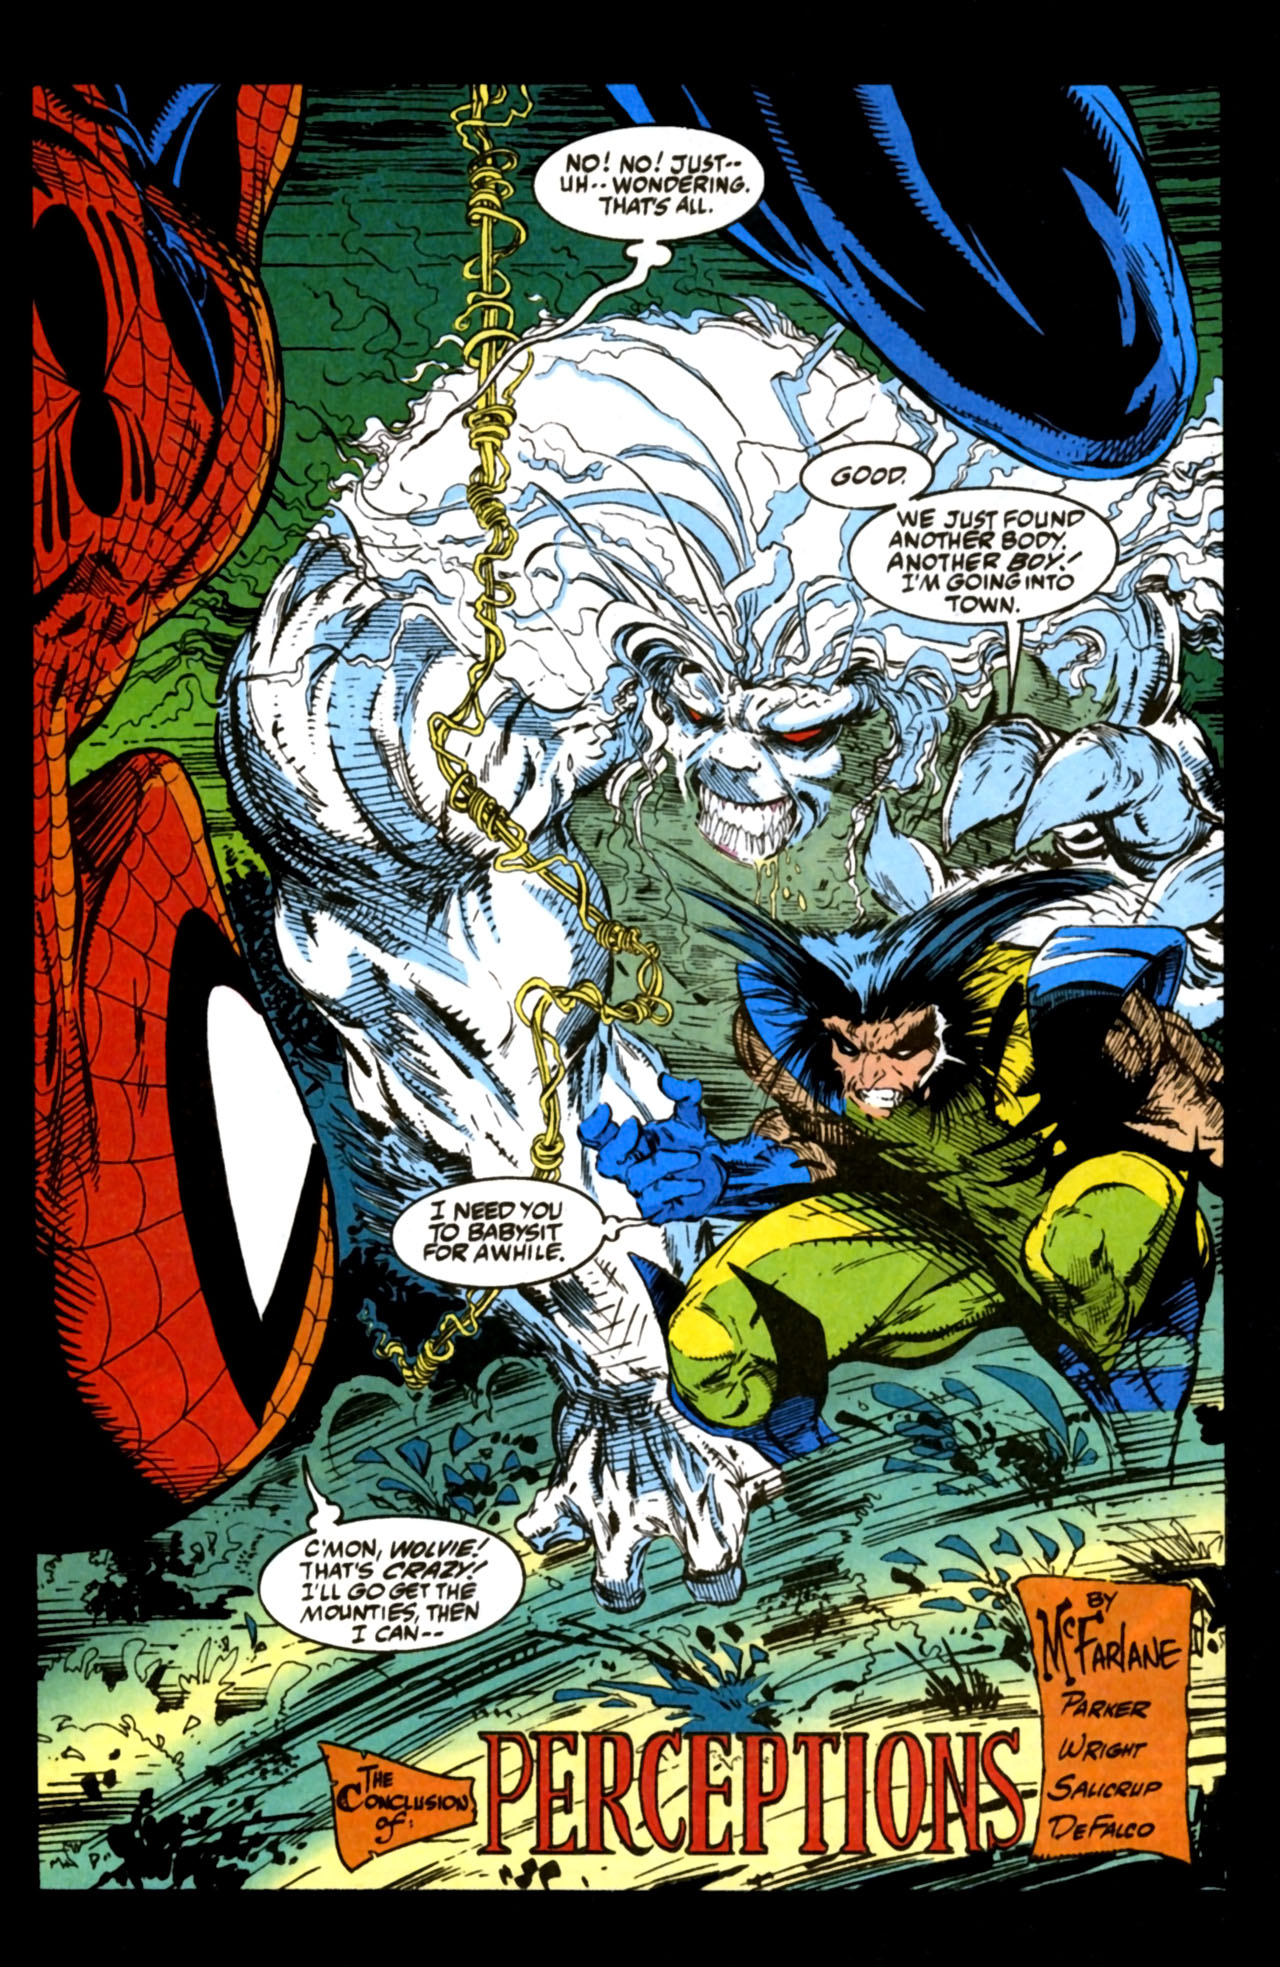 Read online Spider-Man (1990) comic -  Issue #12 - Perceptions Part 5 of 5 - 3